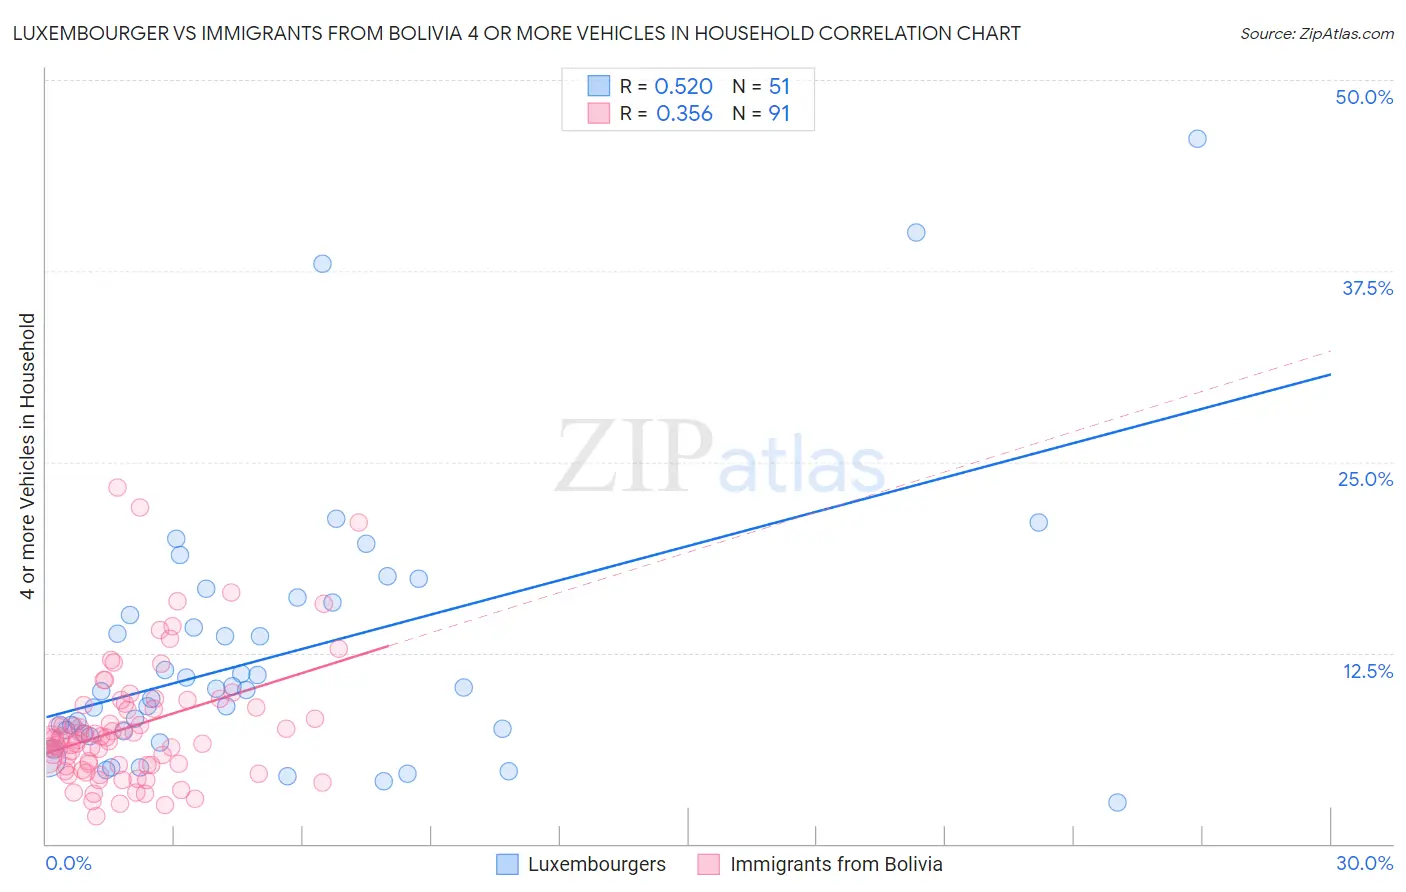 Luxembourger vs Immigrants from Bolivia 4 or more Vehicles in Household